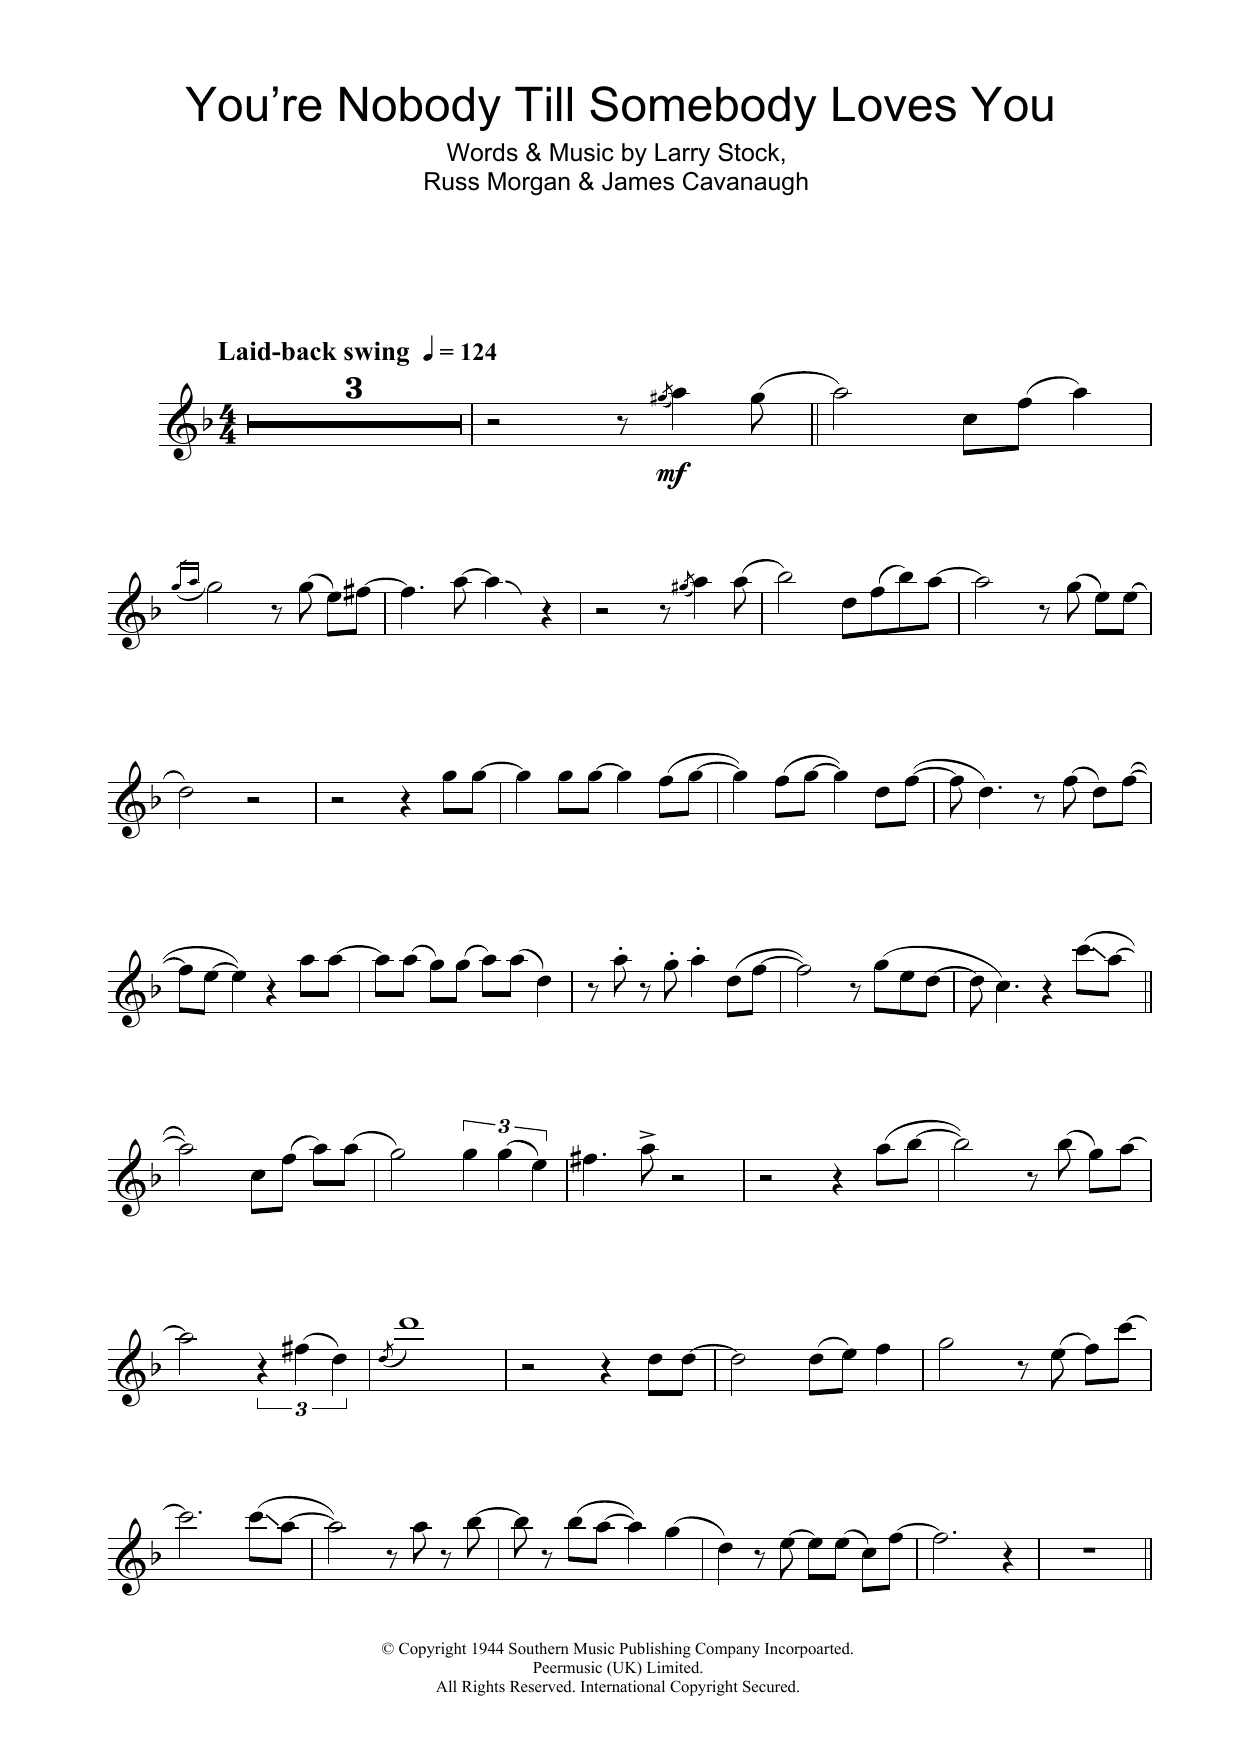 Download Frank Sinatra You're Nobody Till Somebody Loves You Sheet Music